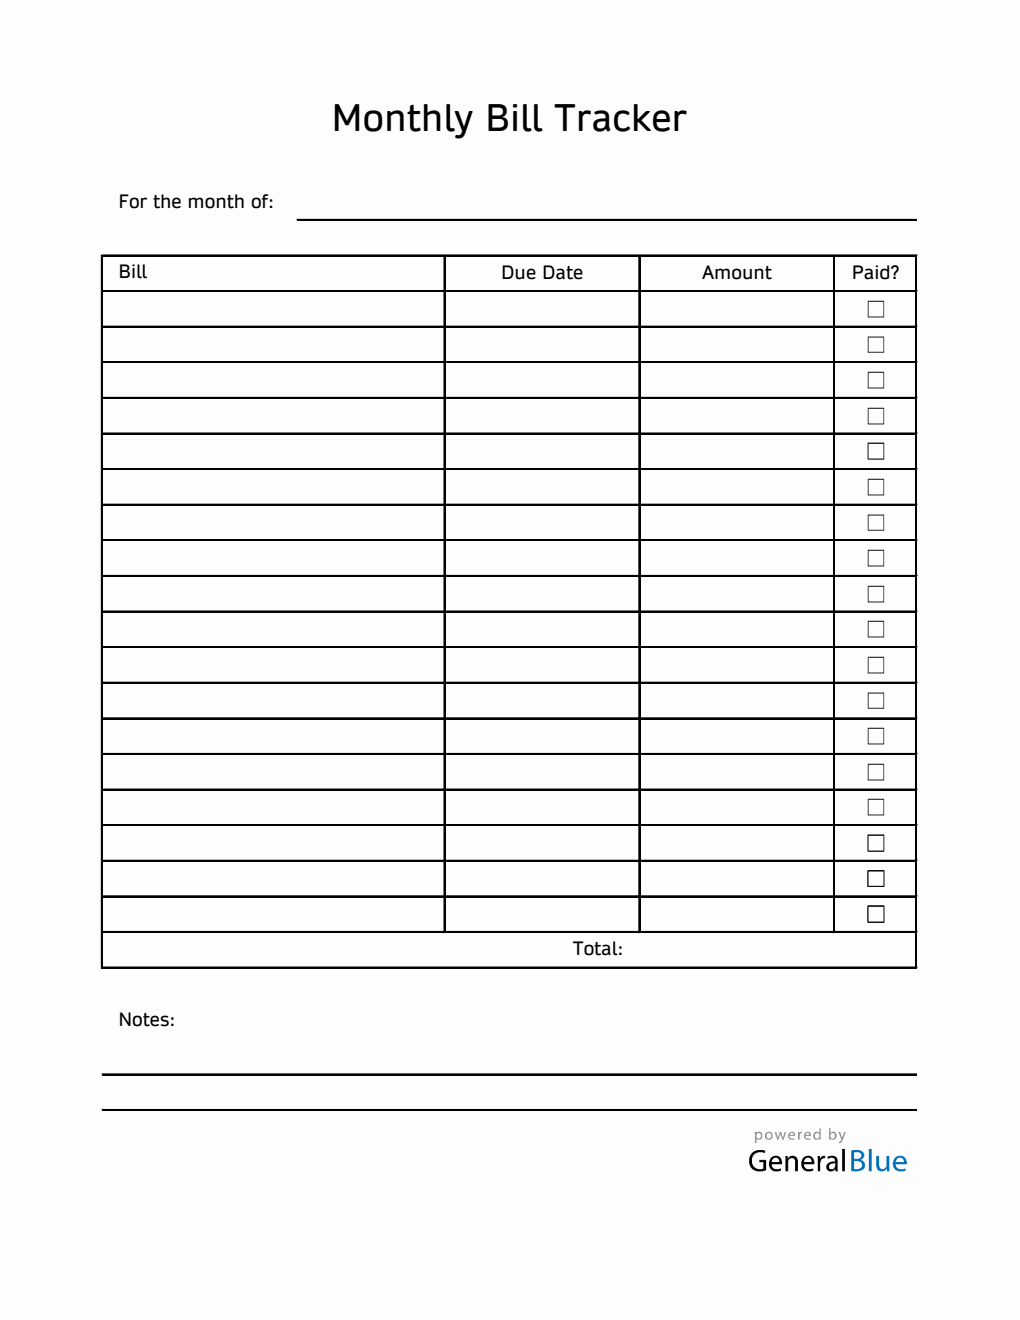 Monthly Bill Tracker in Excel (Printable)